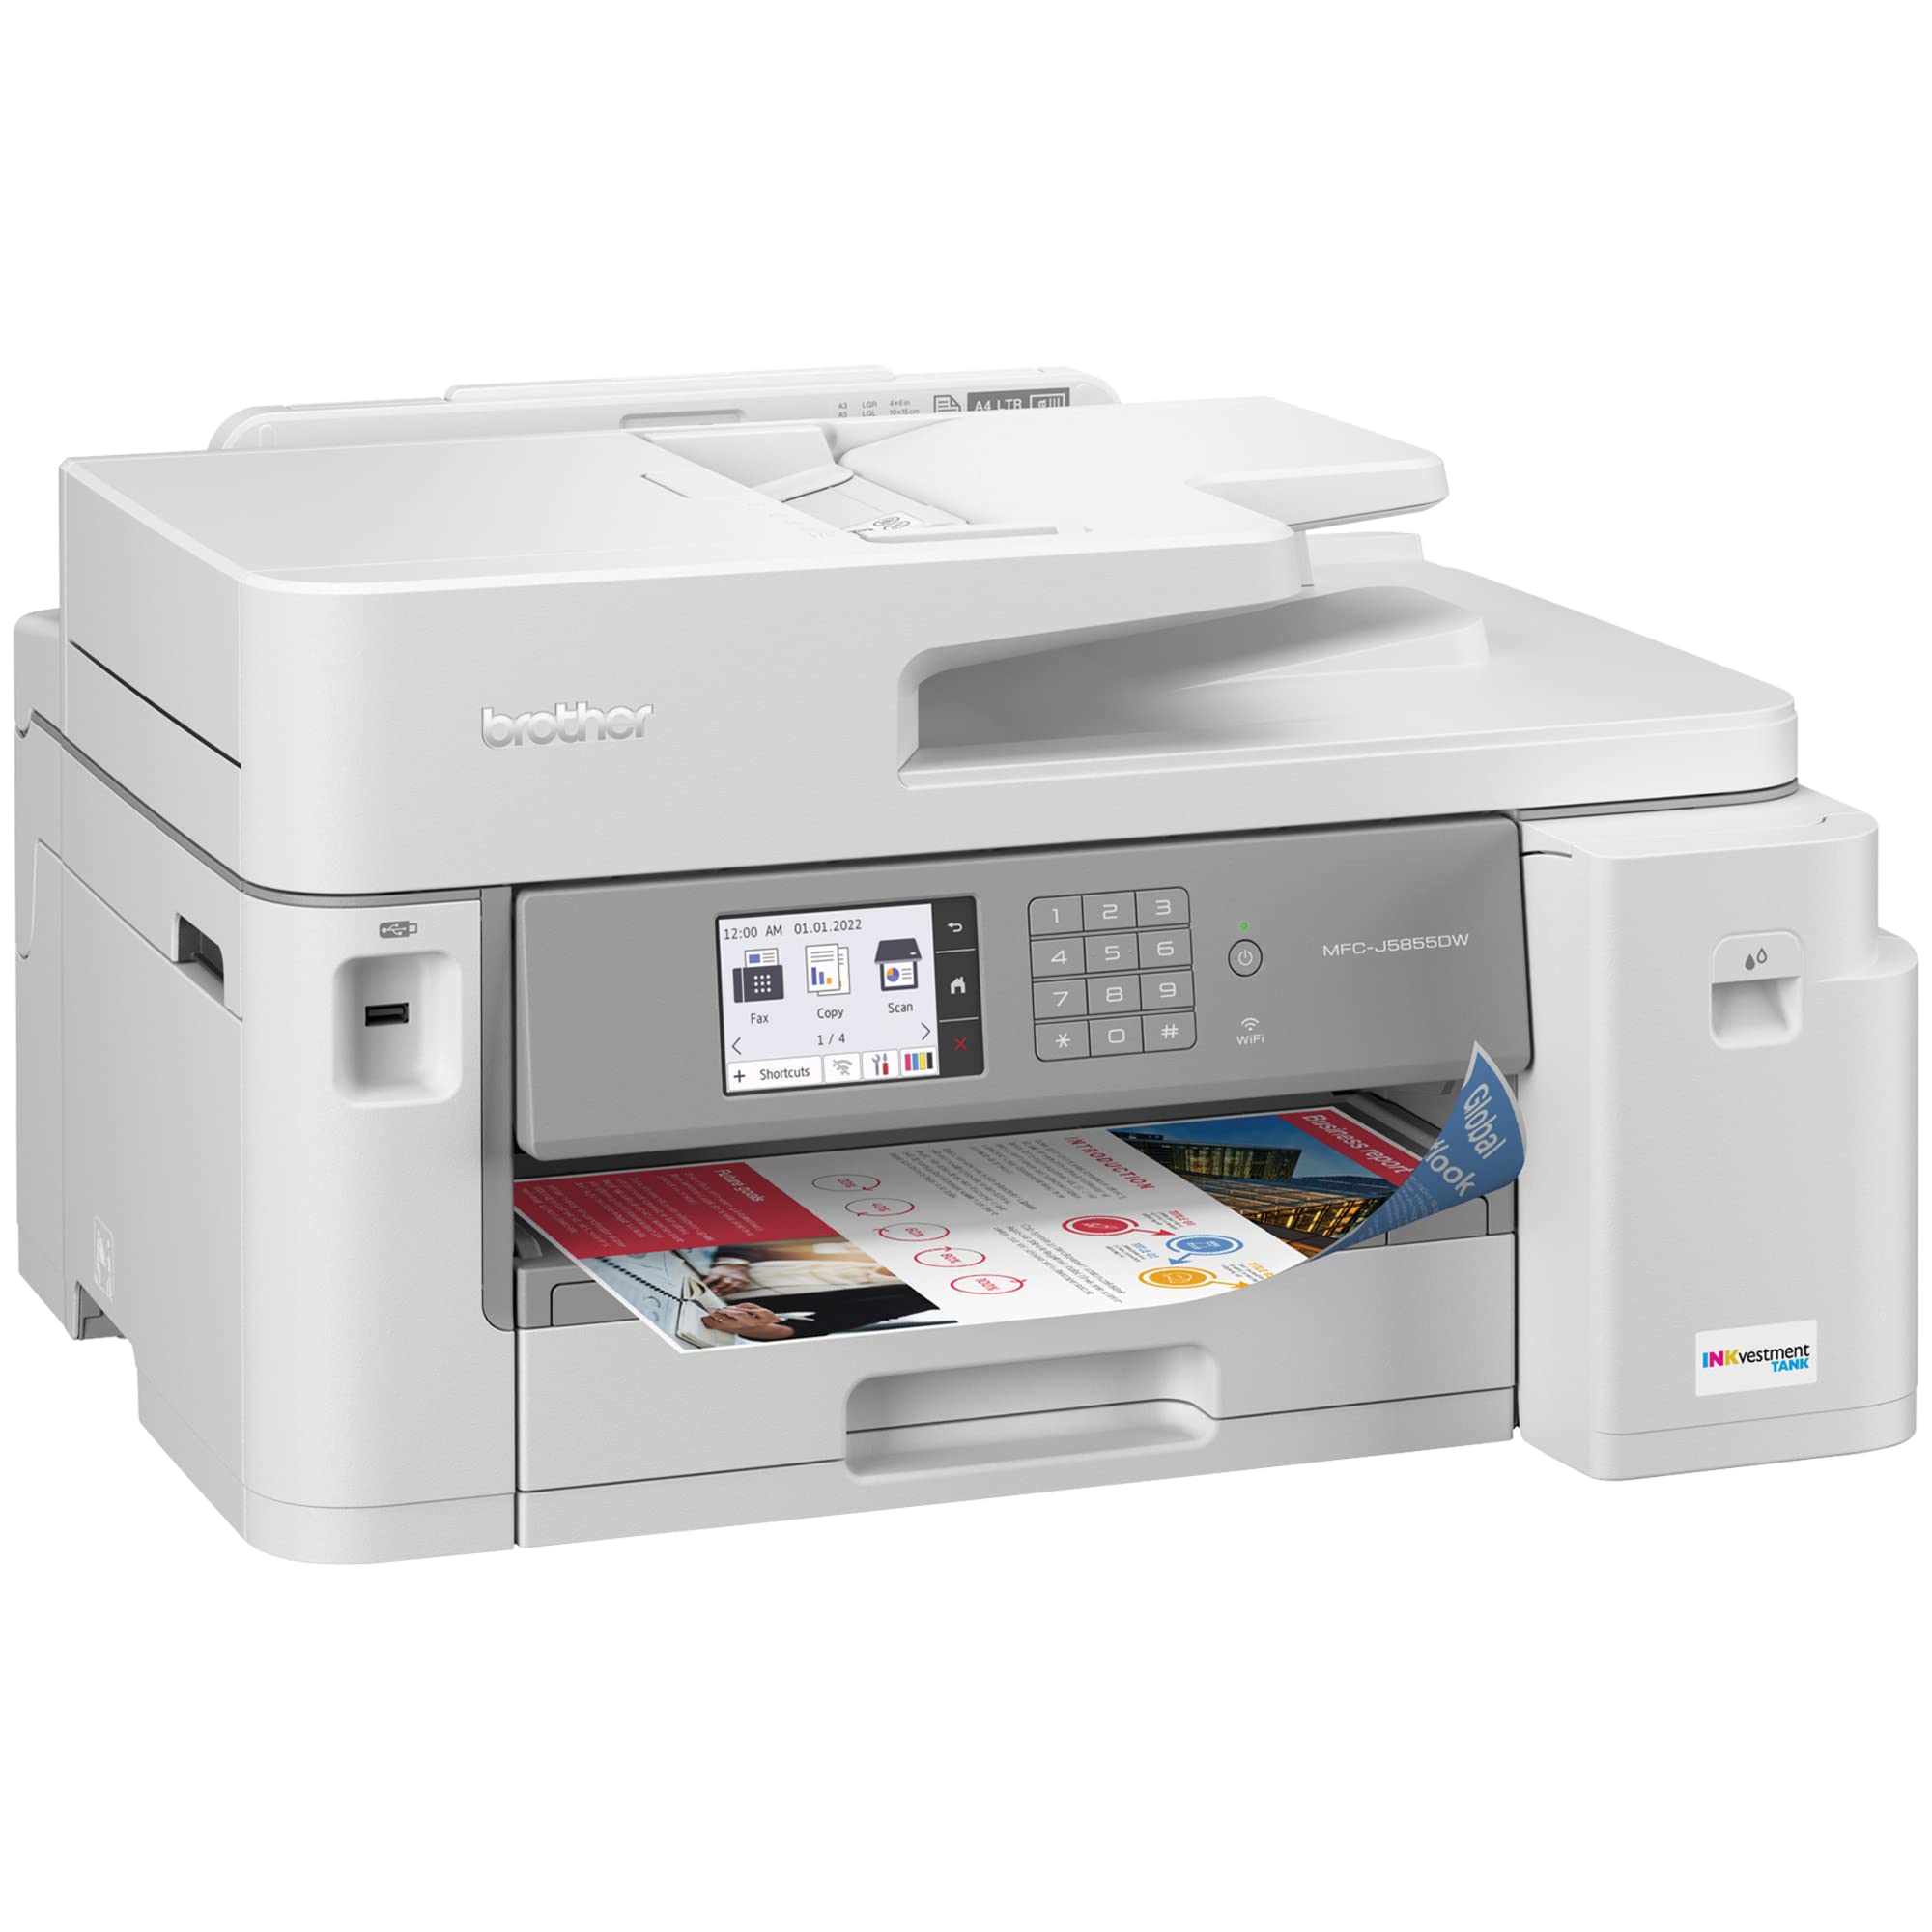 Brother MFC-J5855DW INKvestment Tank Color Inkjet All-in-One Printer with up to 1 Year of Ink in-box1 and to 11” x 17” Printing Capabilities